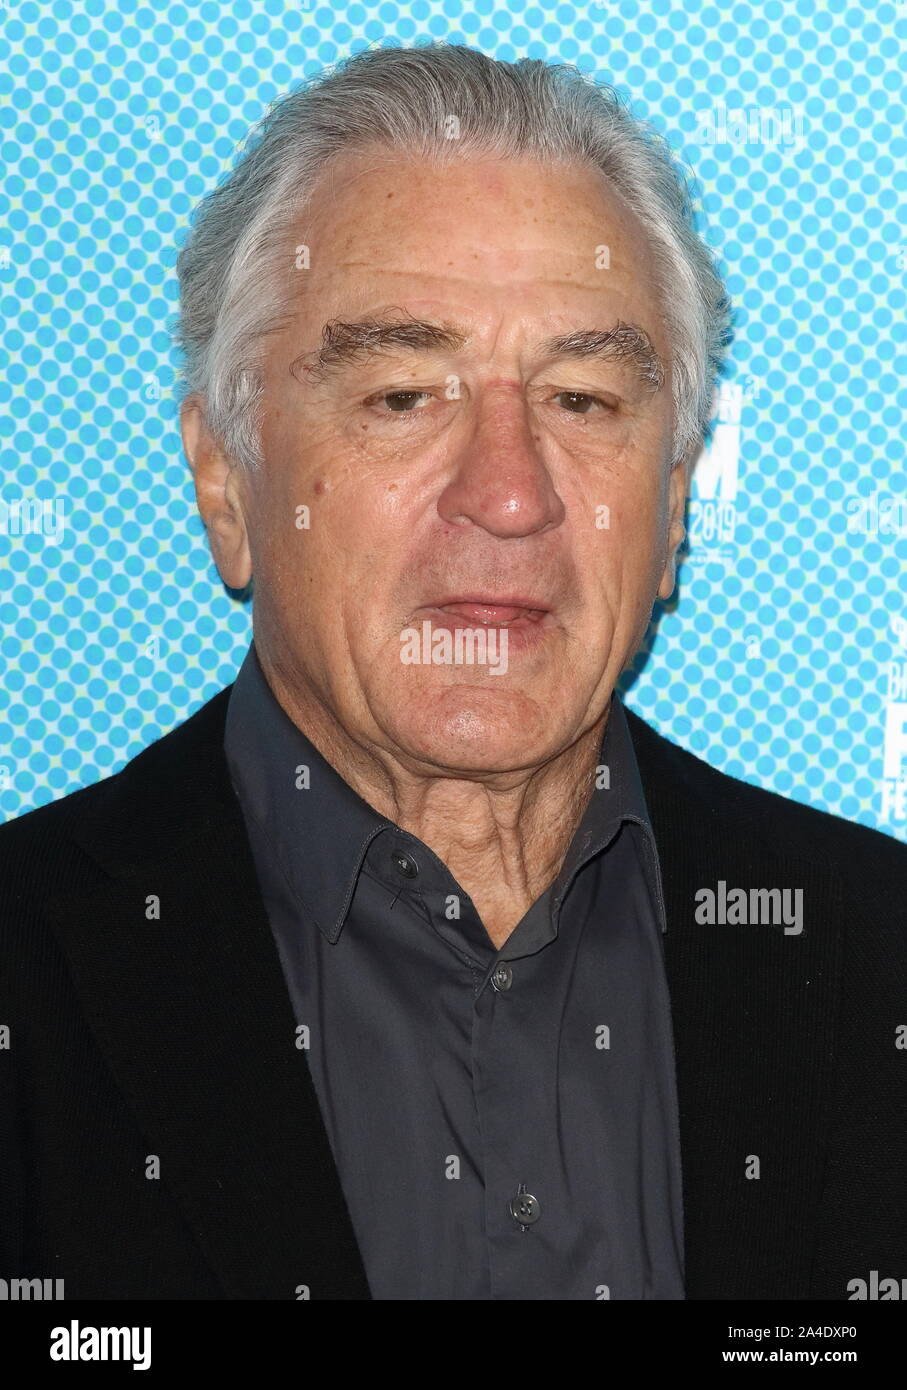 Robert De Niro attends The Irishman Photocall during the 63rd BFI London Film Festival at The Mayfair Hotel in London. Stock Photo